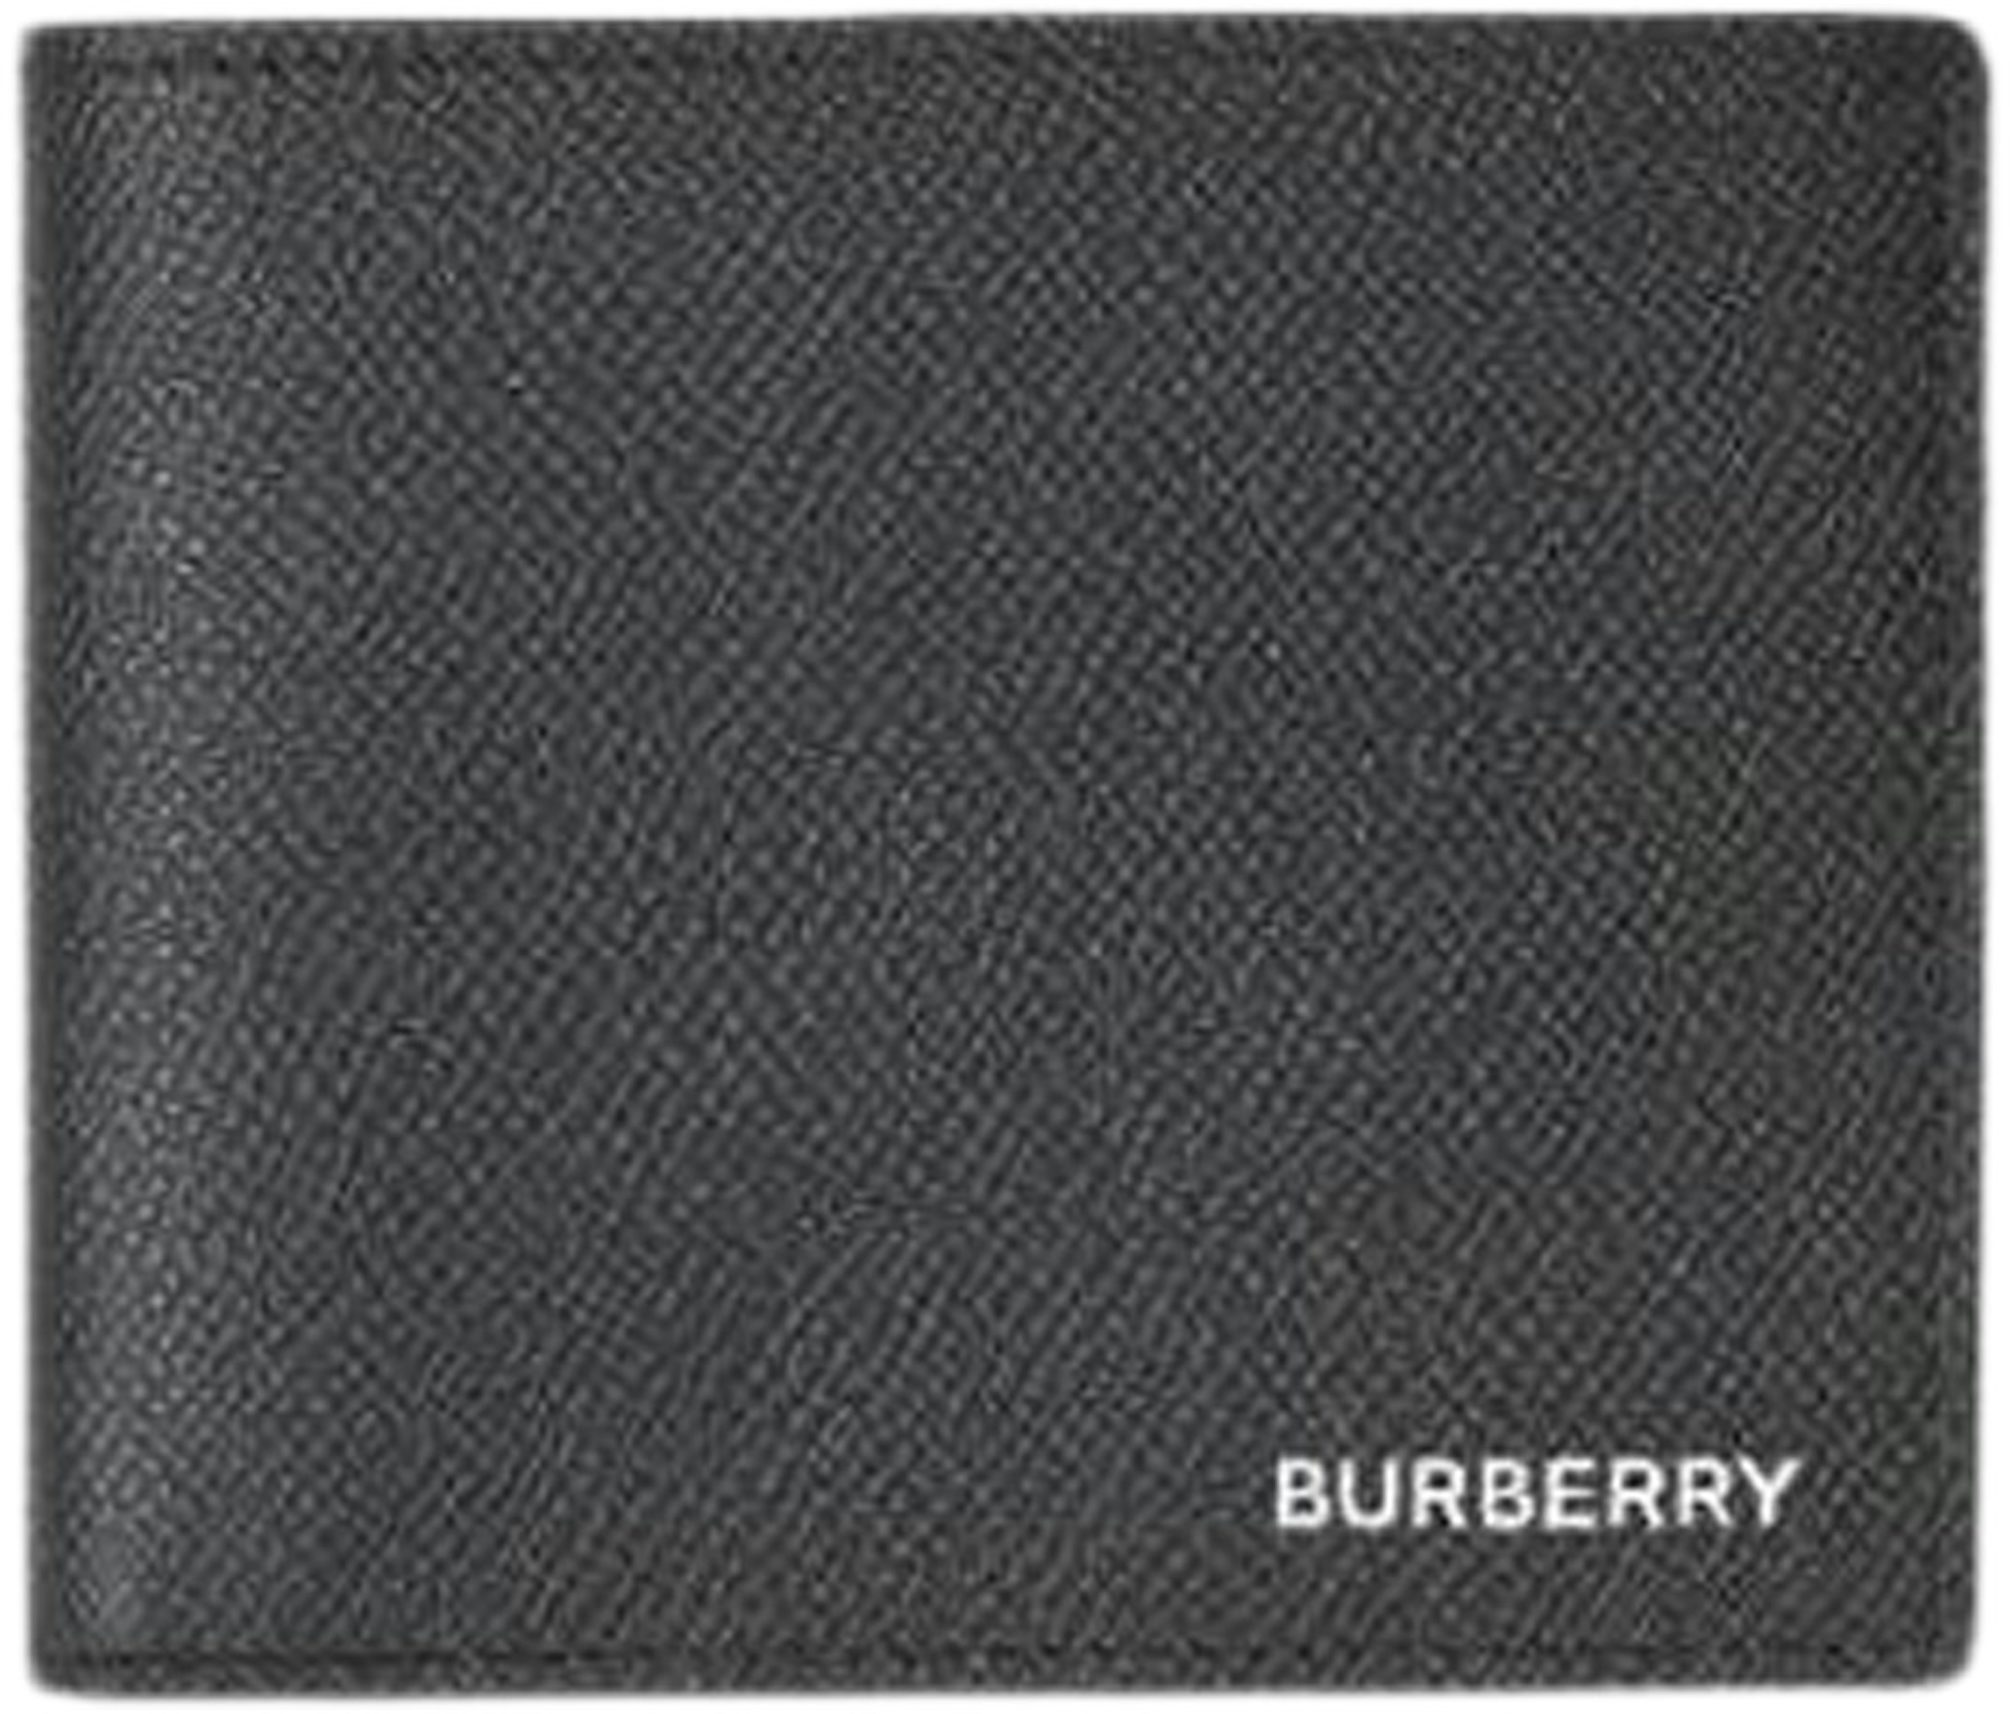 Burberry Grained Leather Bifold Wallet Mineral Blue